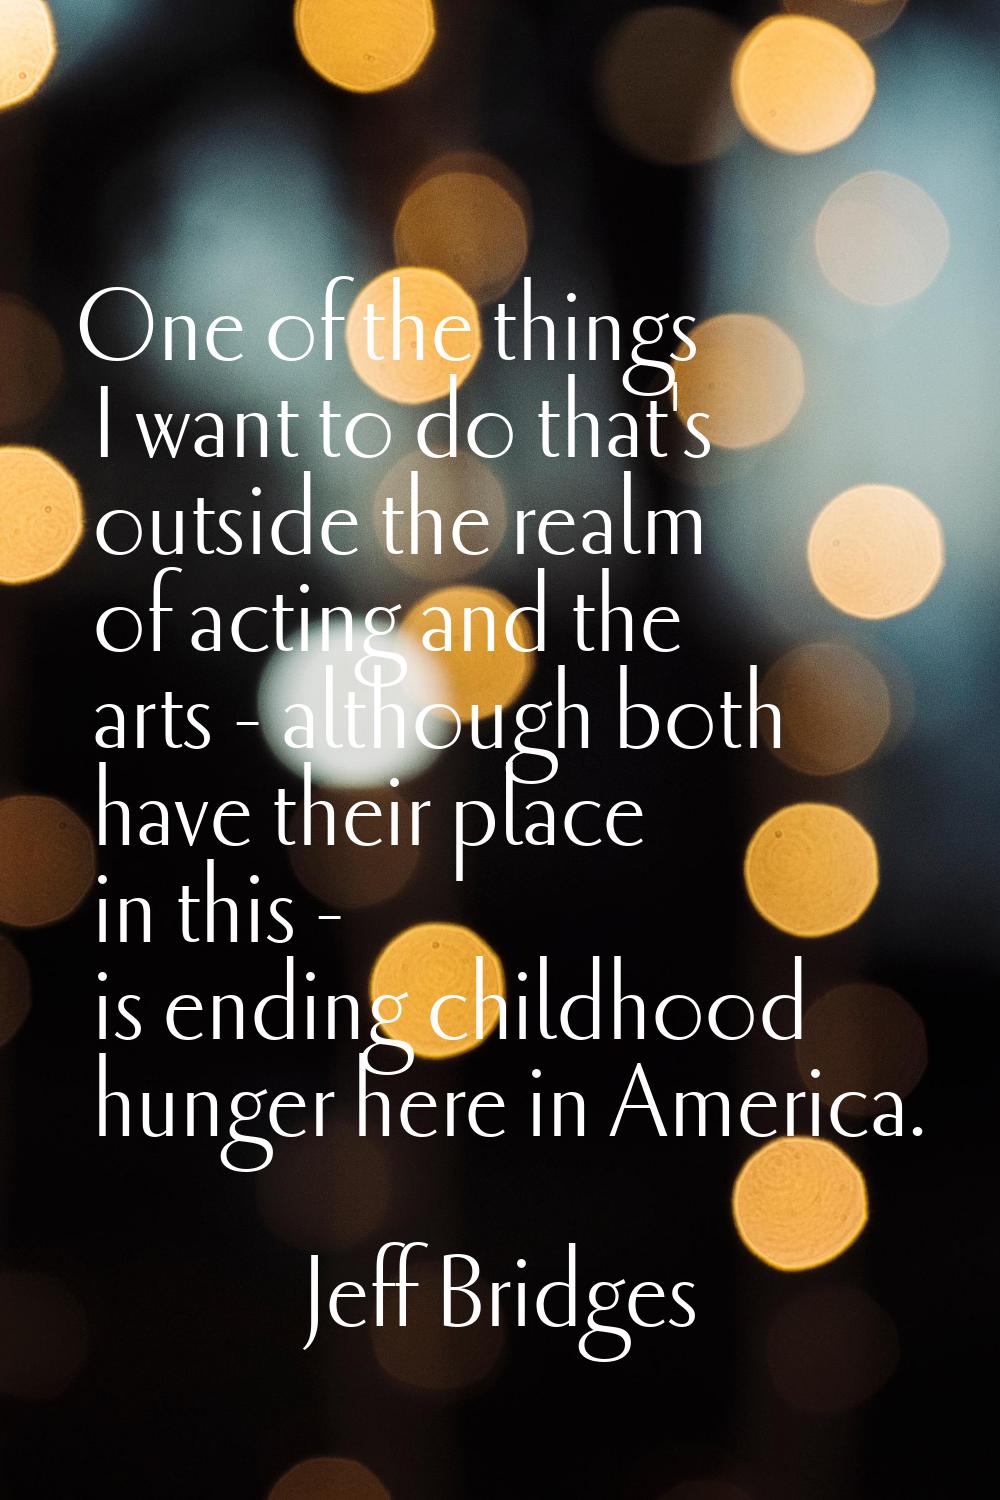 One of the things I want to do that's outside the realm of acting and the arts - although both have